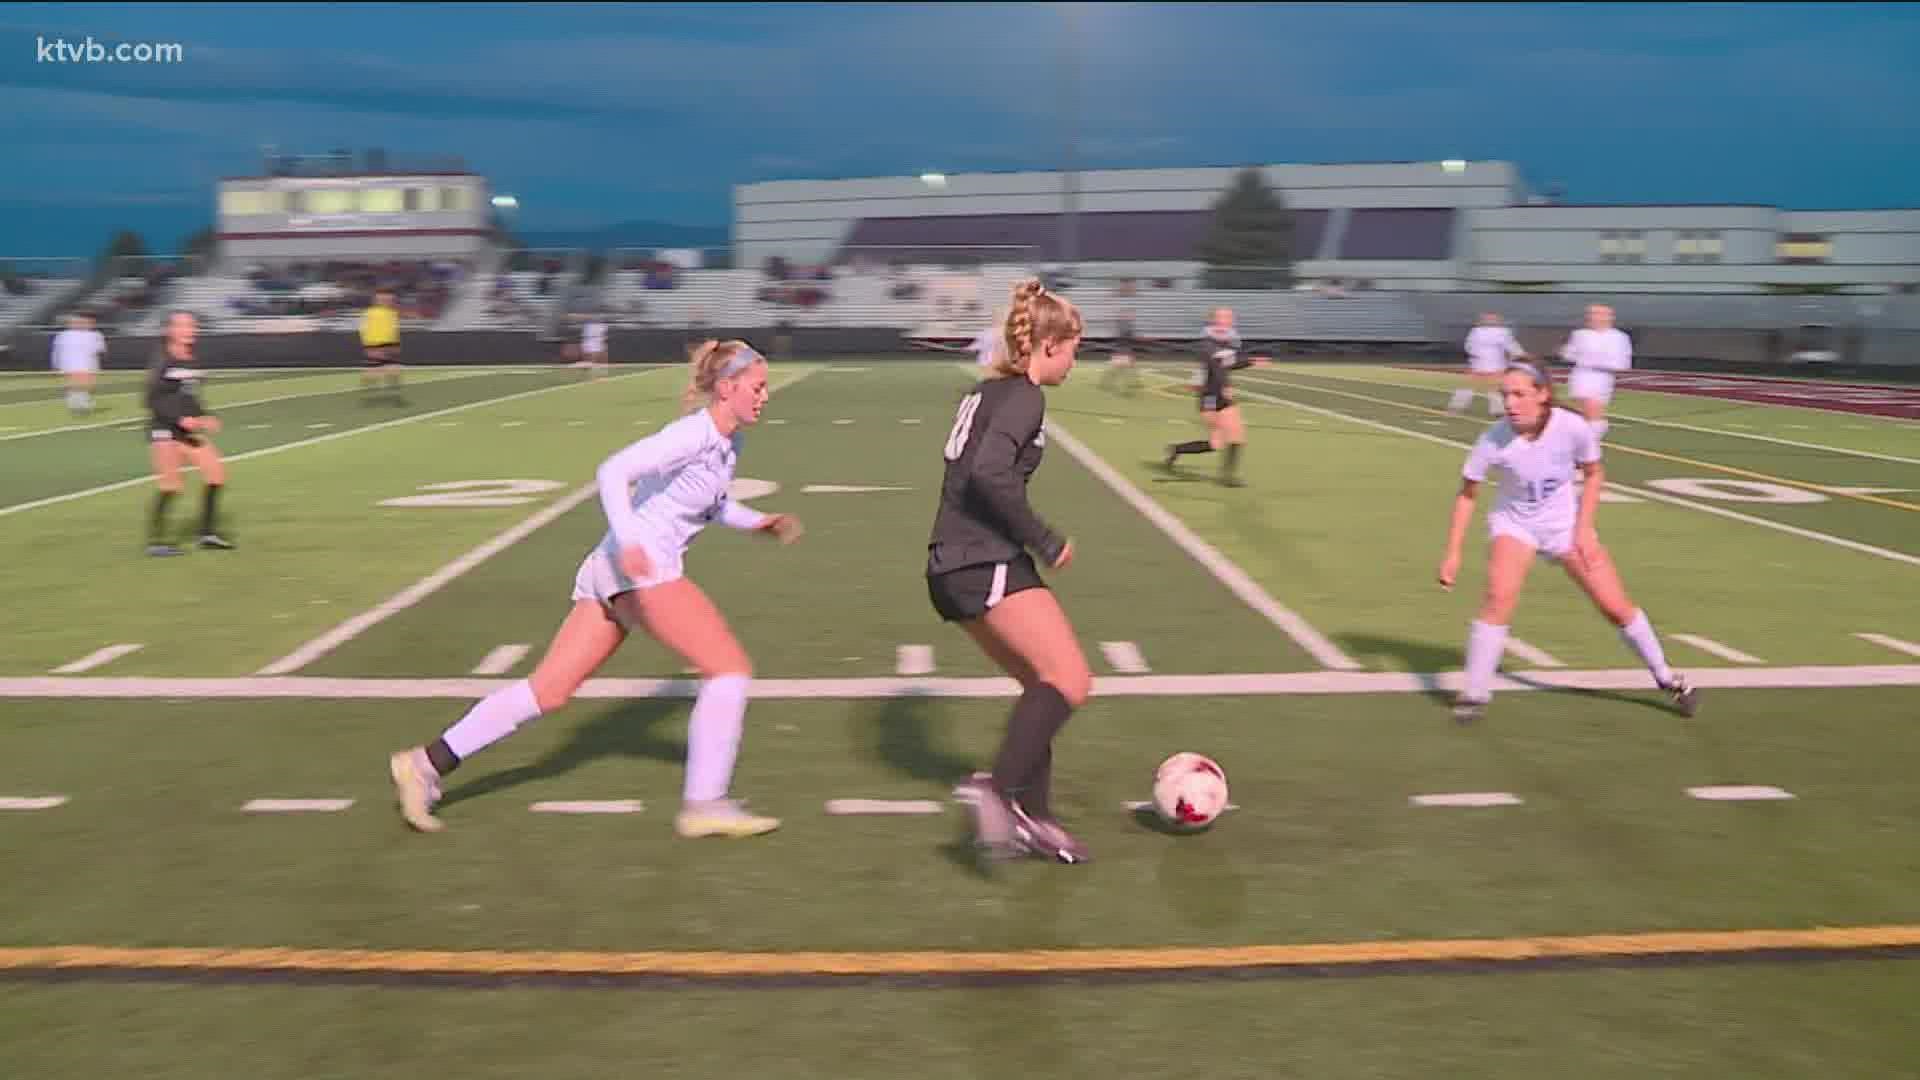 Rocky Mountain came out on top 2-1 over Timberline. Both teams are headed to the 5A state tournament.